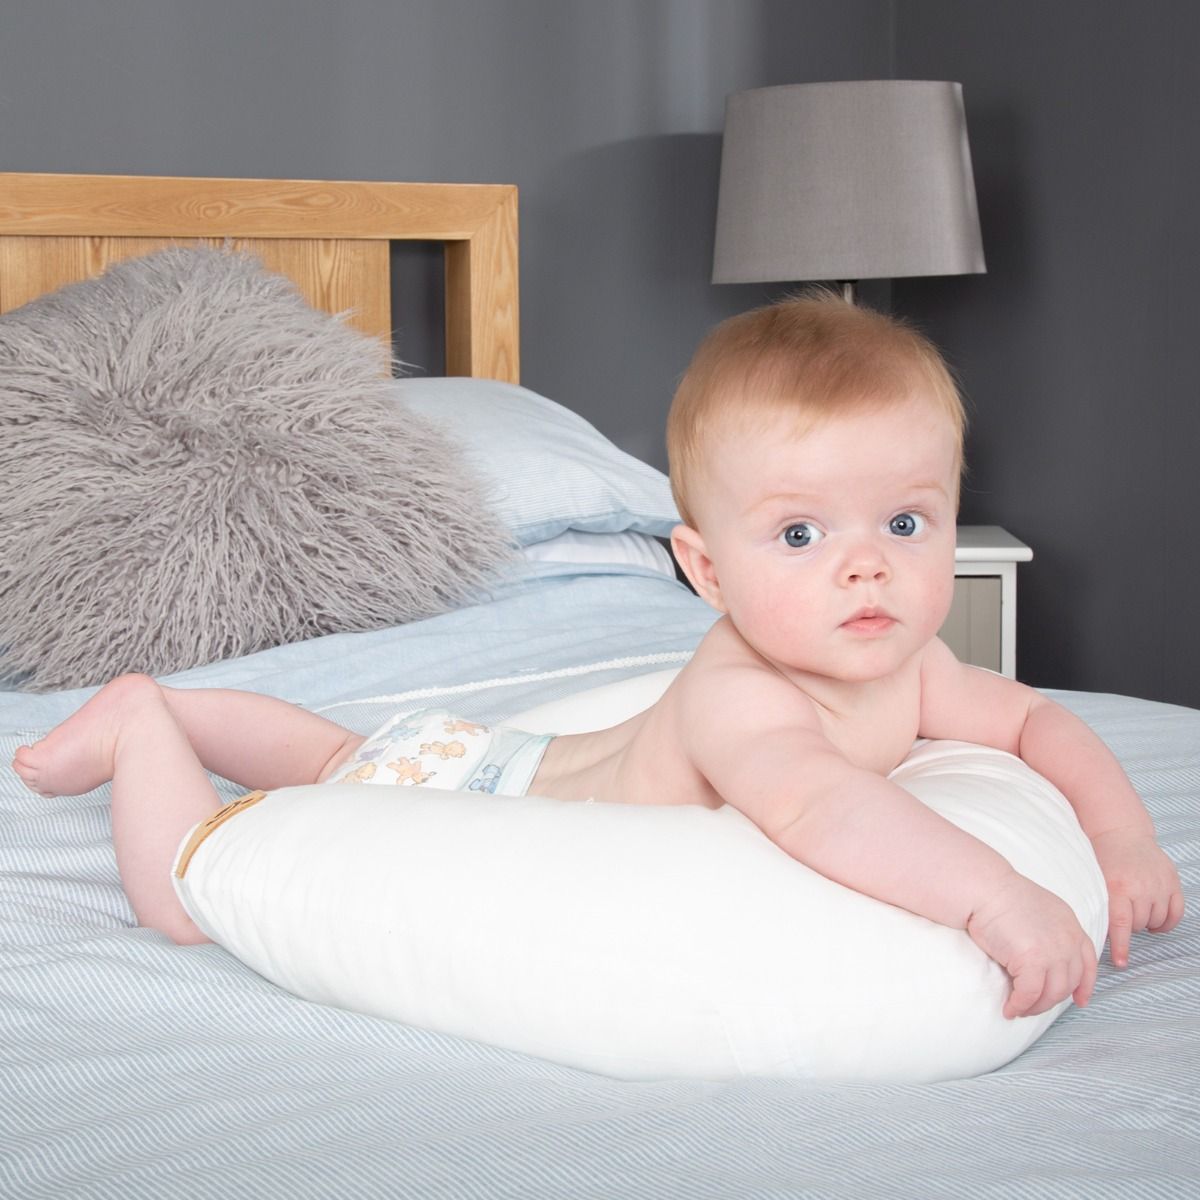 Cuddle Co Organic Feeding & Infant Support Pillow - Baby On The Move